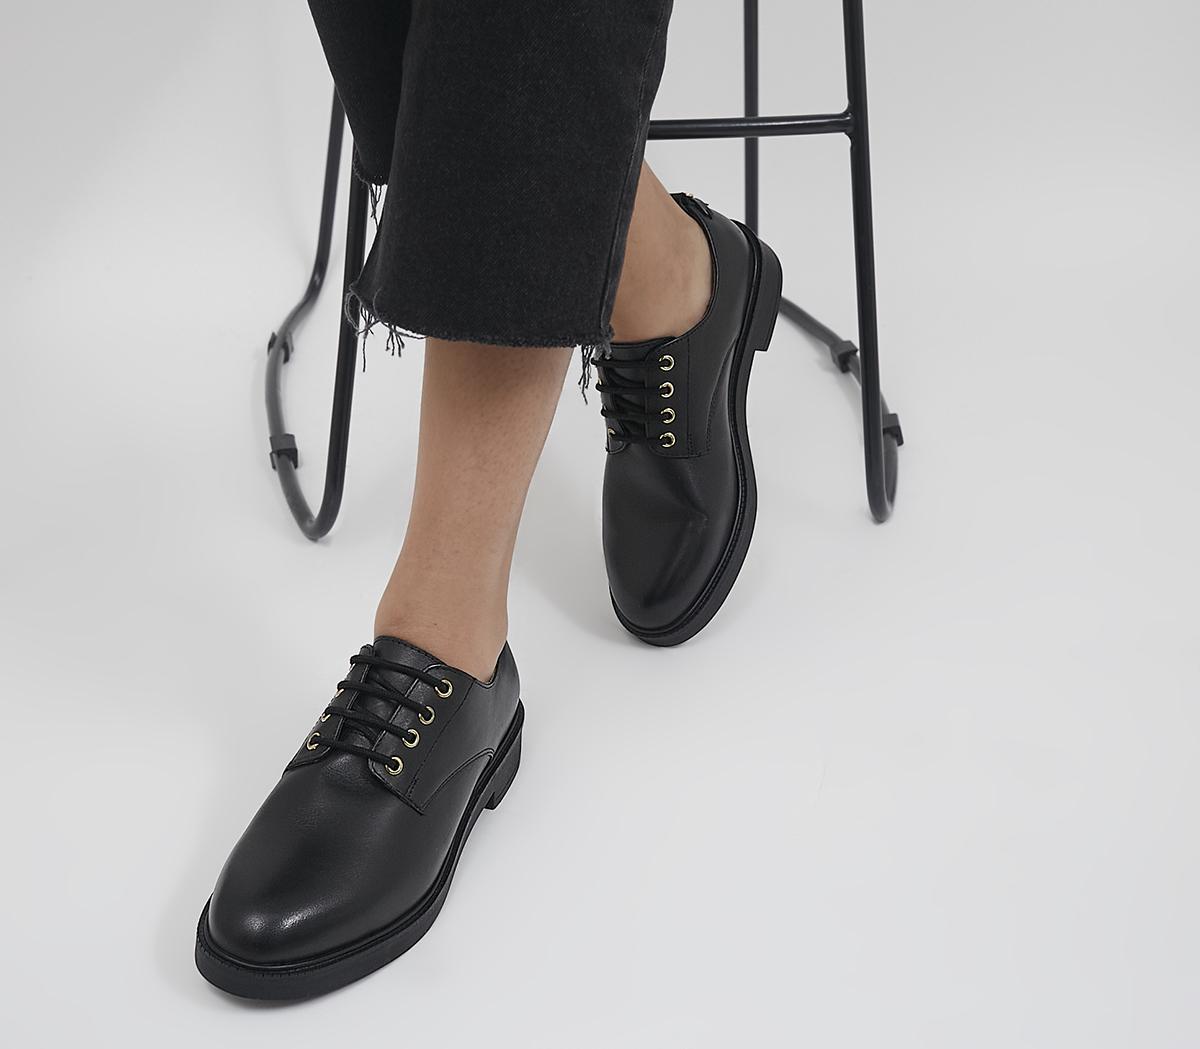 OfficeFamed Smooth Sole Lace Up ShoesBlack Leather